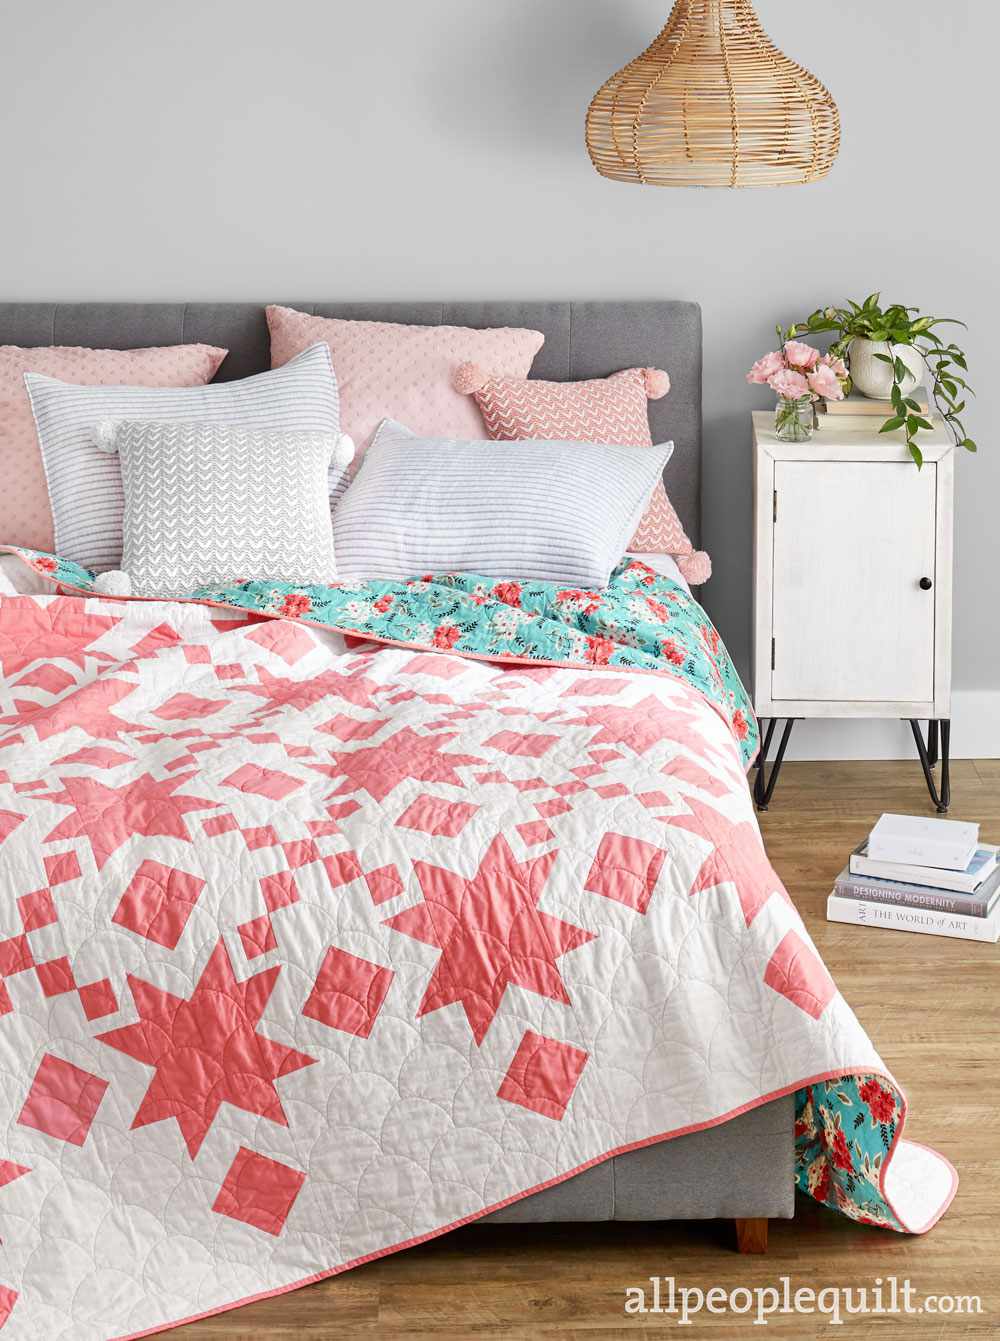 Free Bed Quilt Patterns, Queen Size Duvet Cover Pattern